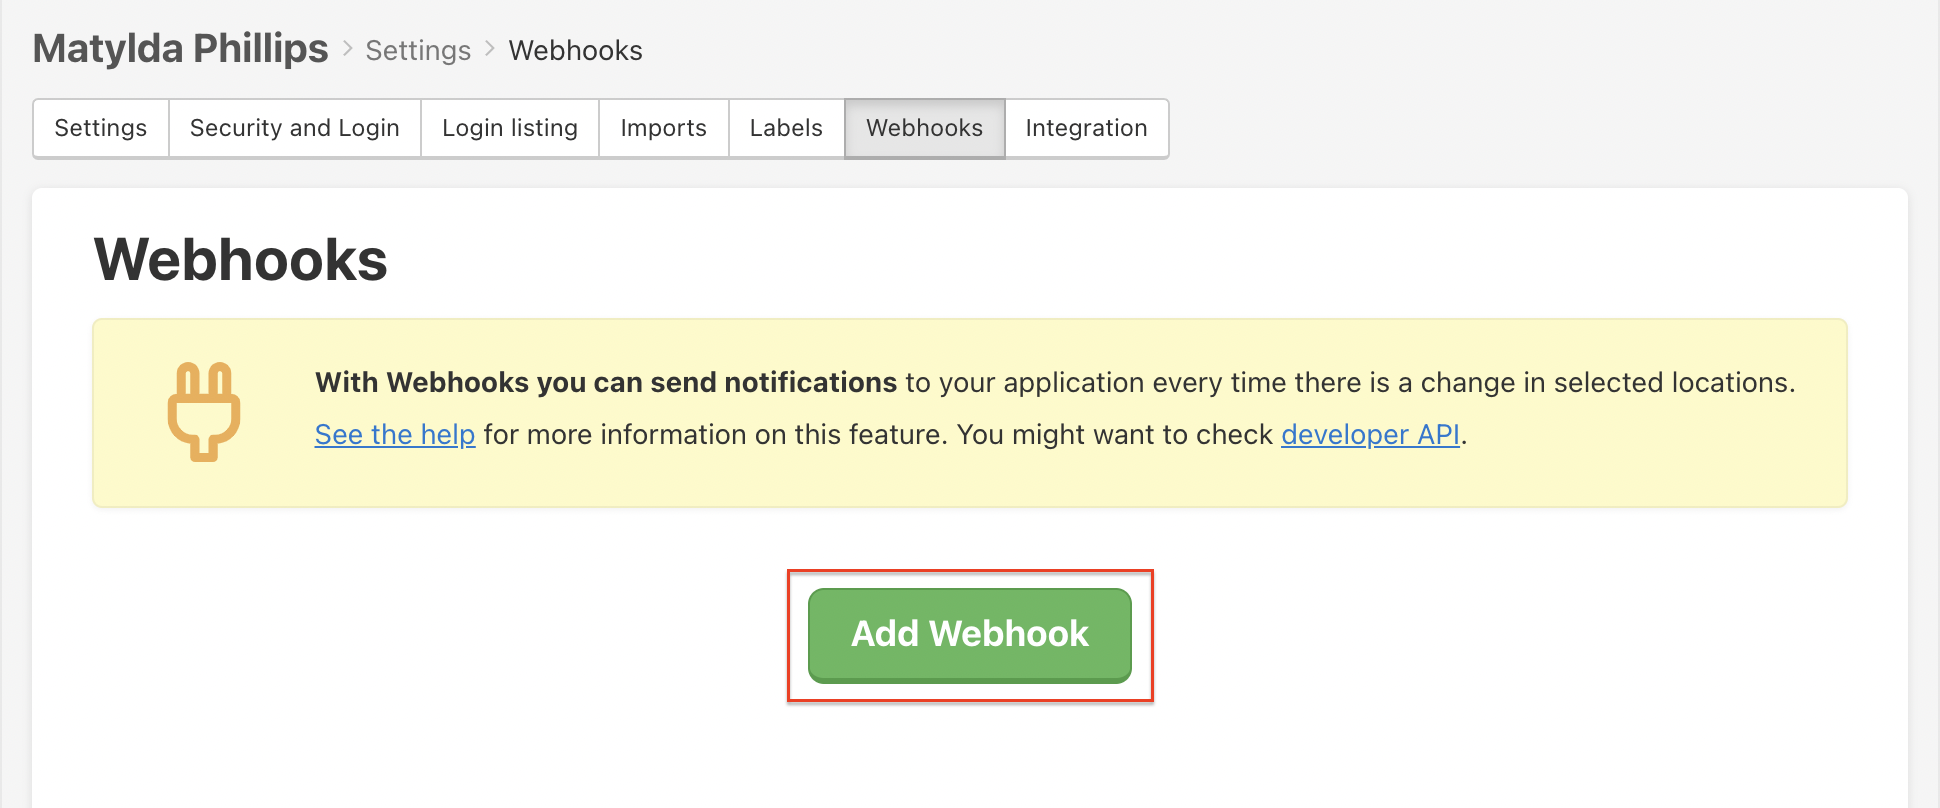 Example how to add a new webhook.